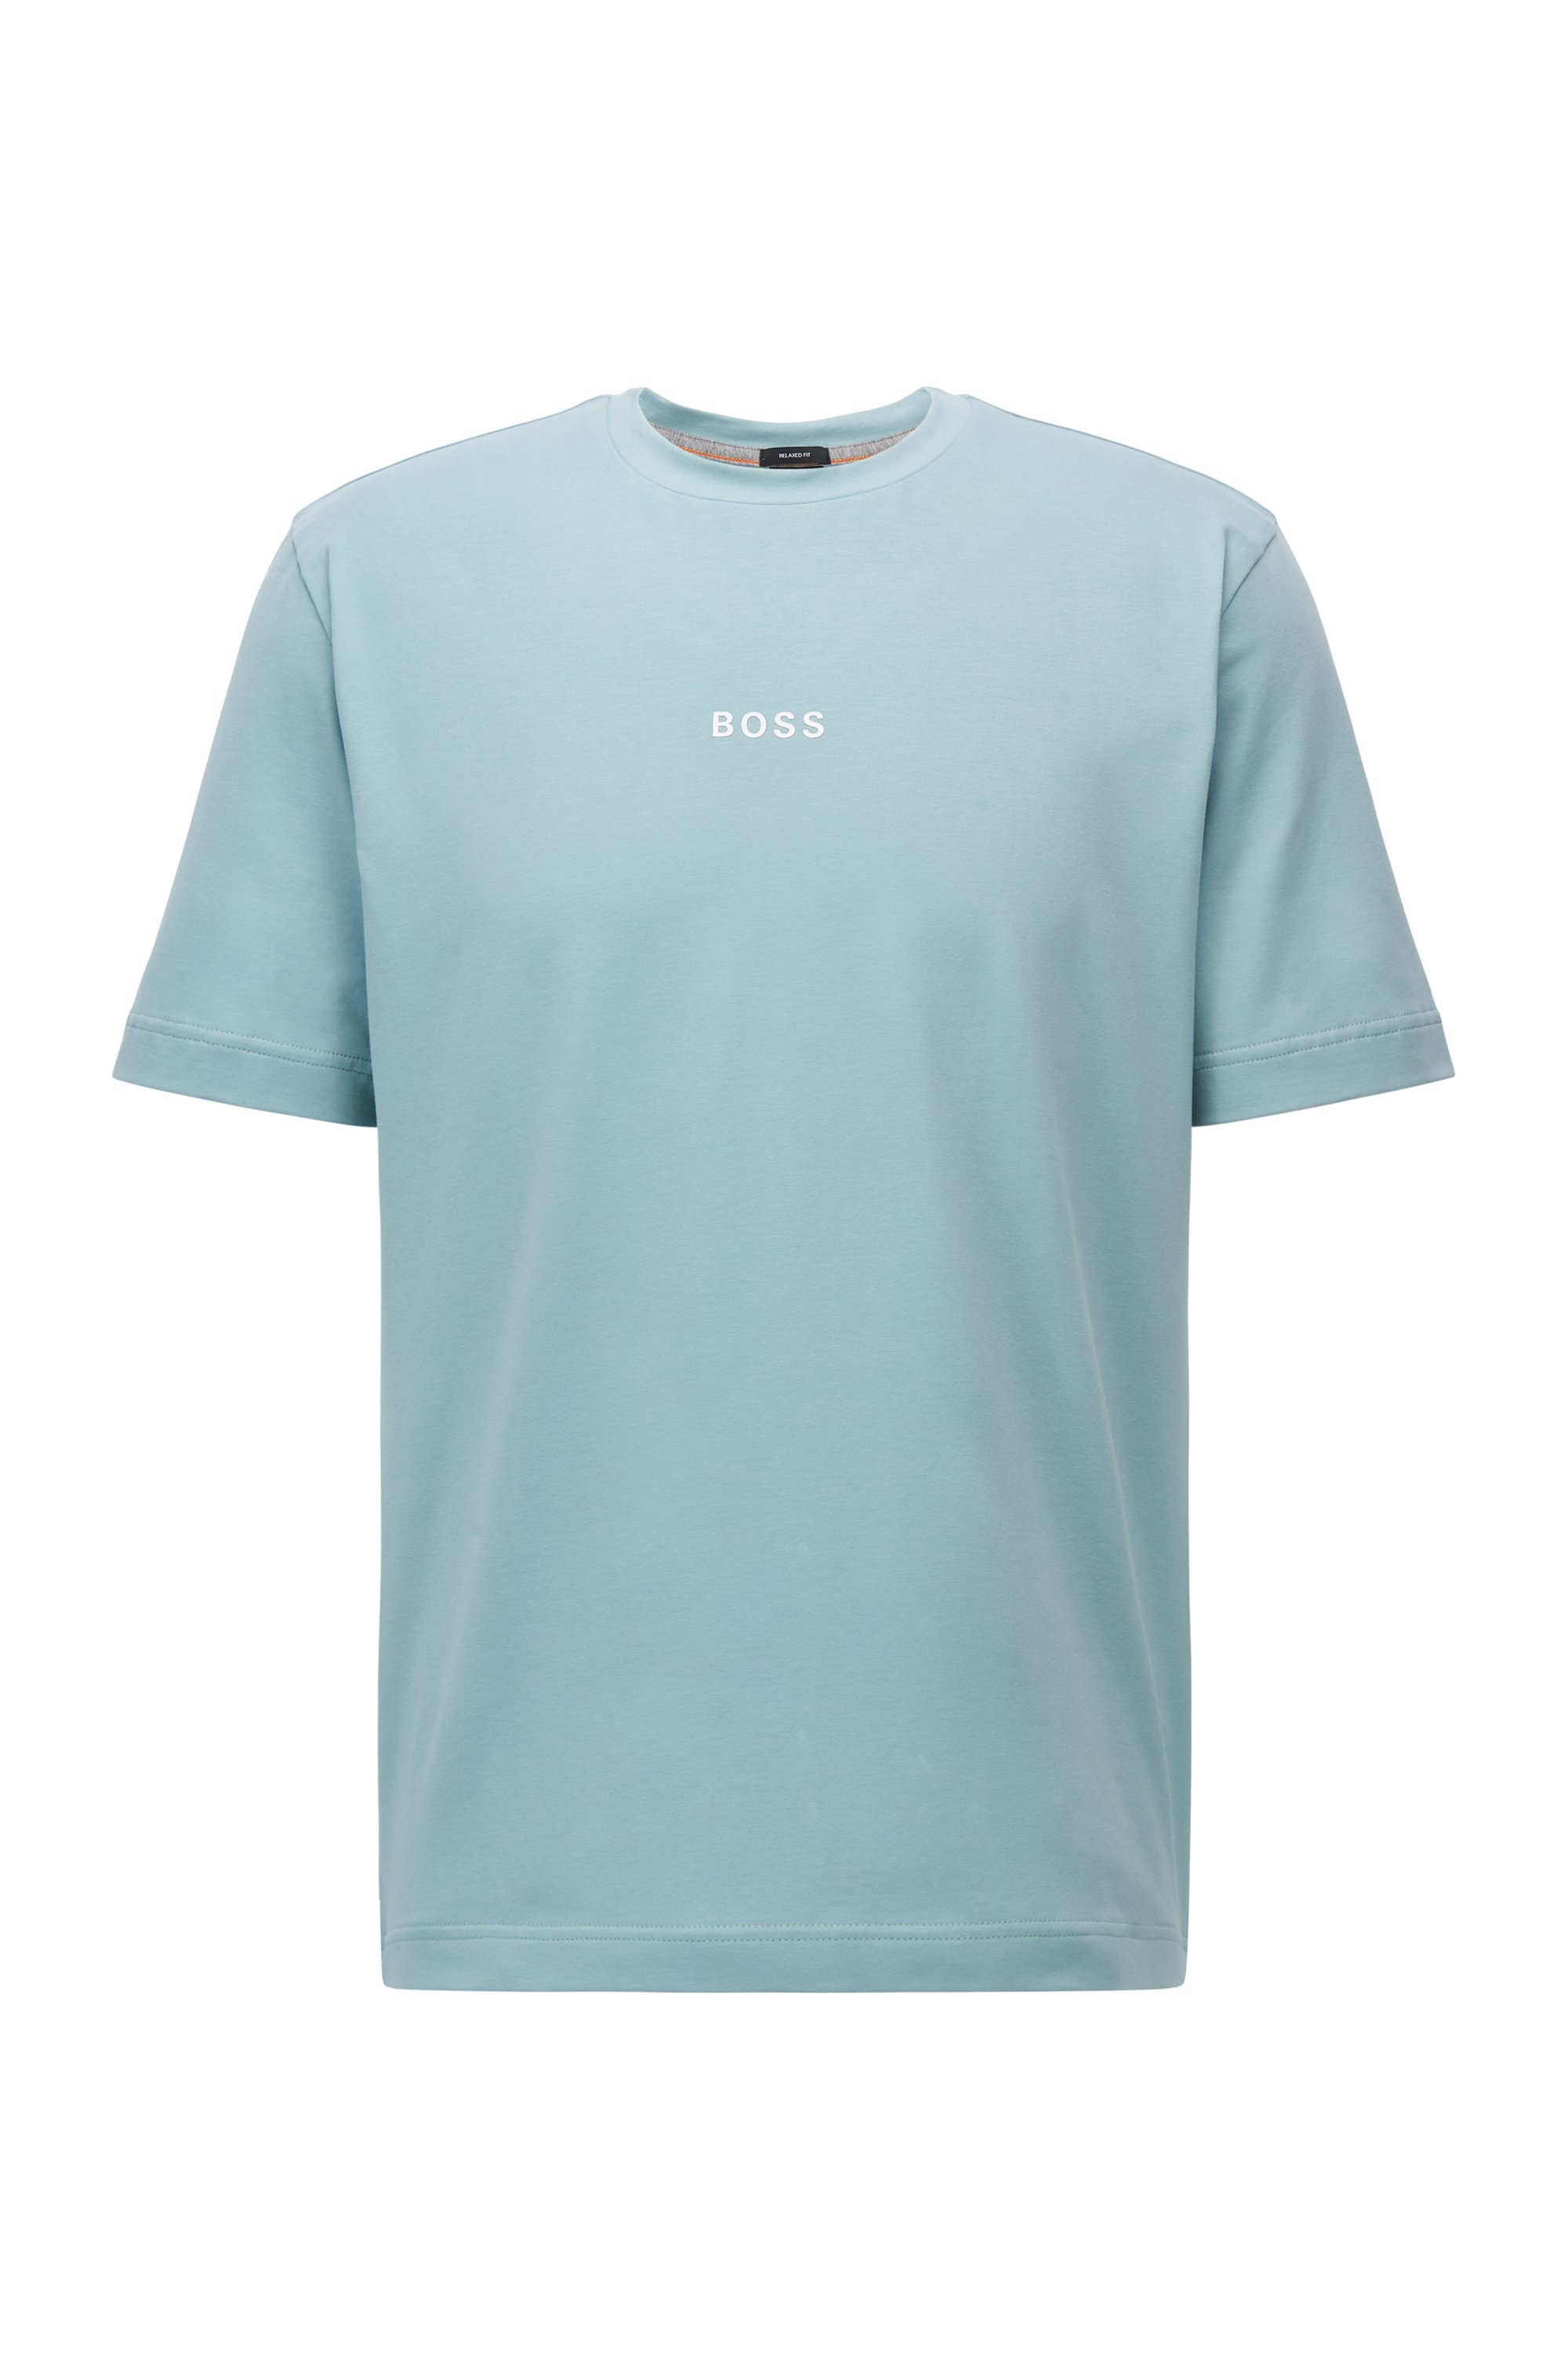 Relaxed-fit T-shirt in stretch cotton with logo print, Turquoise